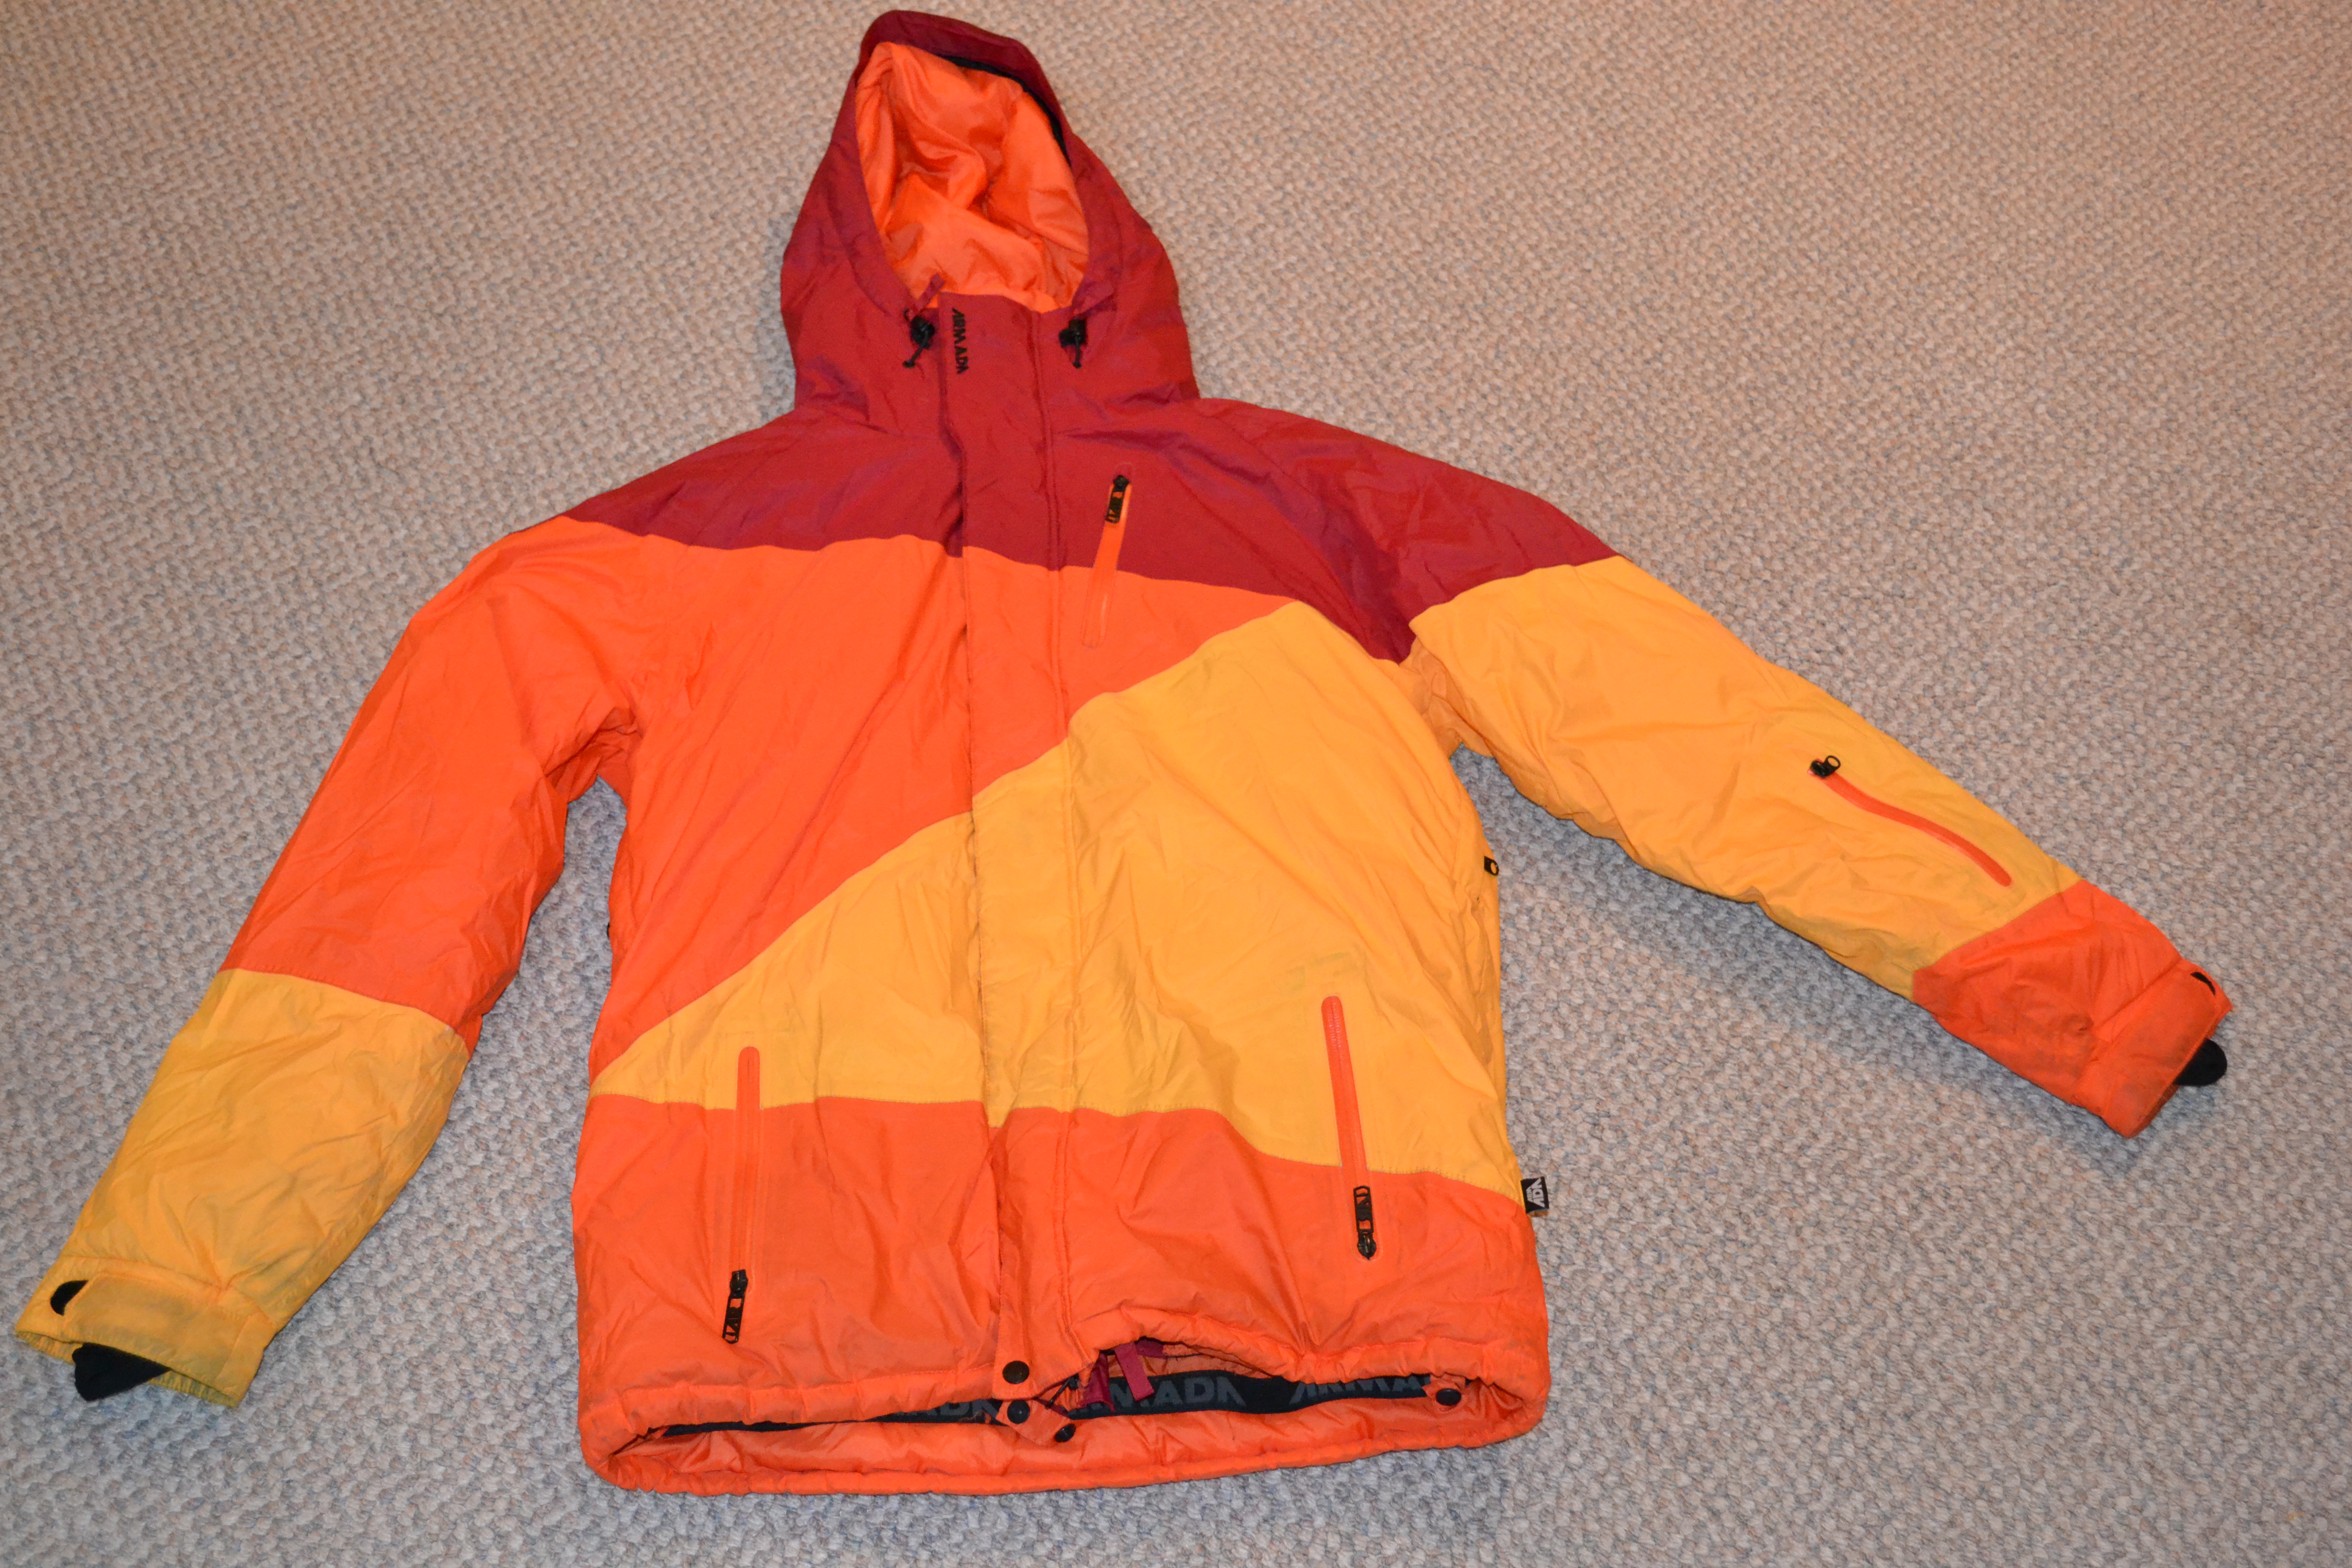 DROPPED PRICE!!! Armada Jacket - Sell and Trade - Newschoolers.com